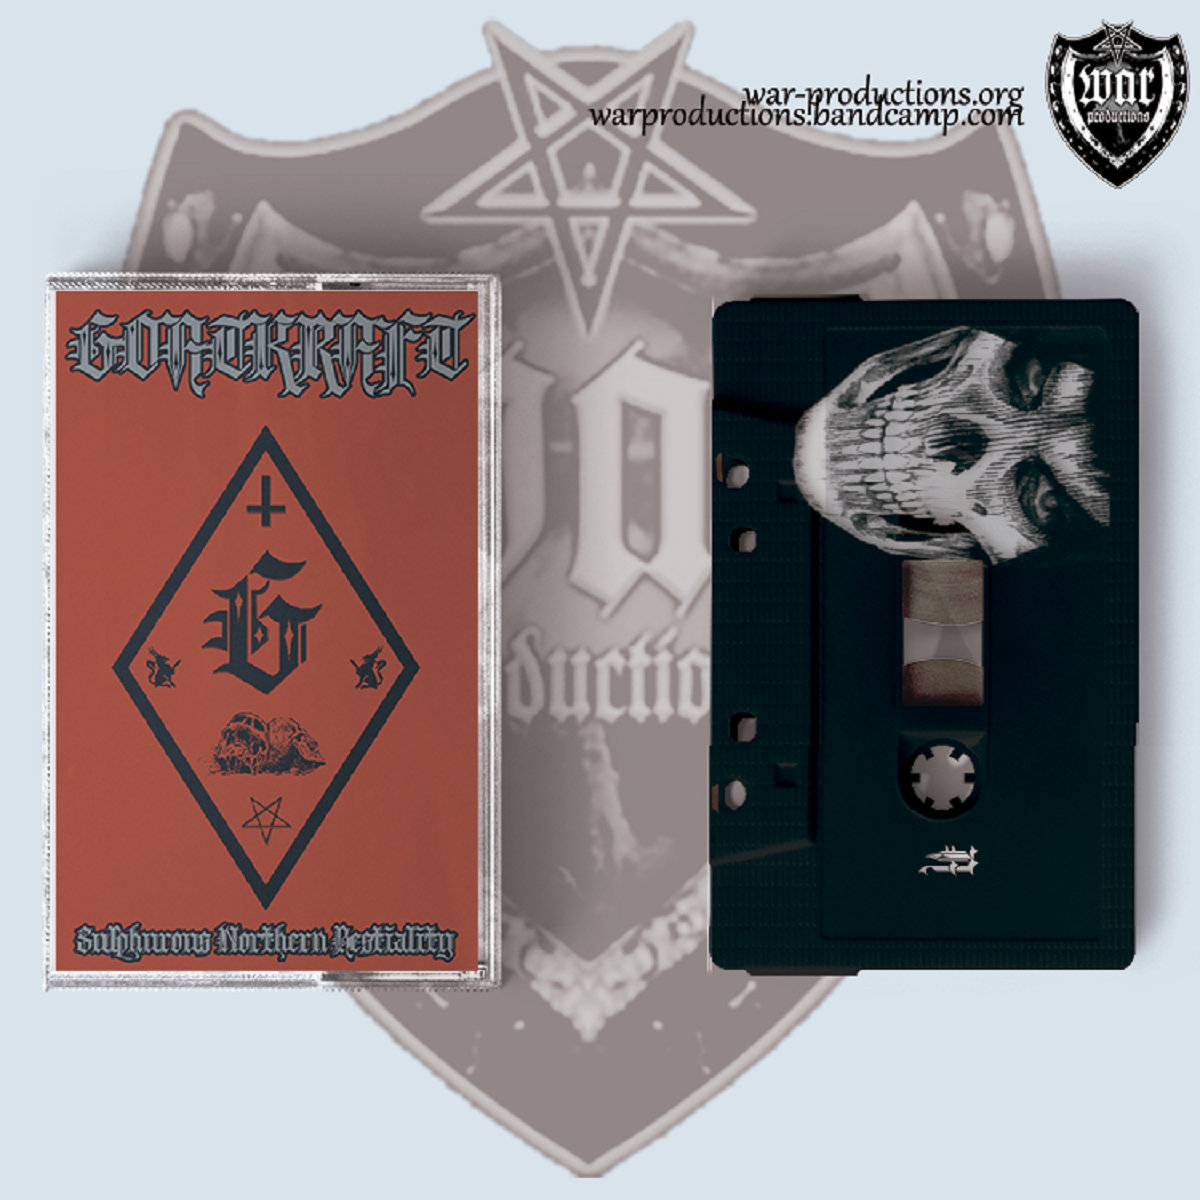 #Goatkraft #News #Preorder
Out June 7th 

Originally by @BoneheadIron in CD and LP format, the tape version finally arrives, which @WarProd  releases with great honour

warproductions.bandcamp.com/album/wpt098

#WarProductions
#SupportTheUnderground
#BlackDeathMetal
#BlackDeathMetalTapes